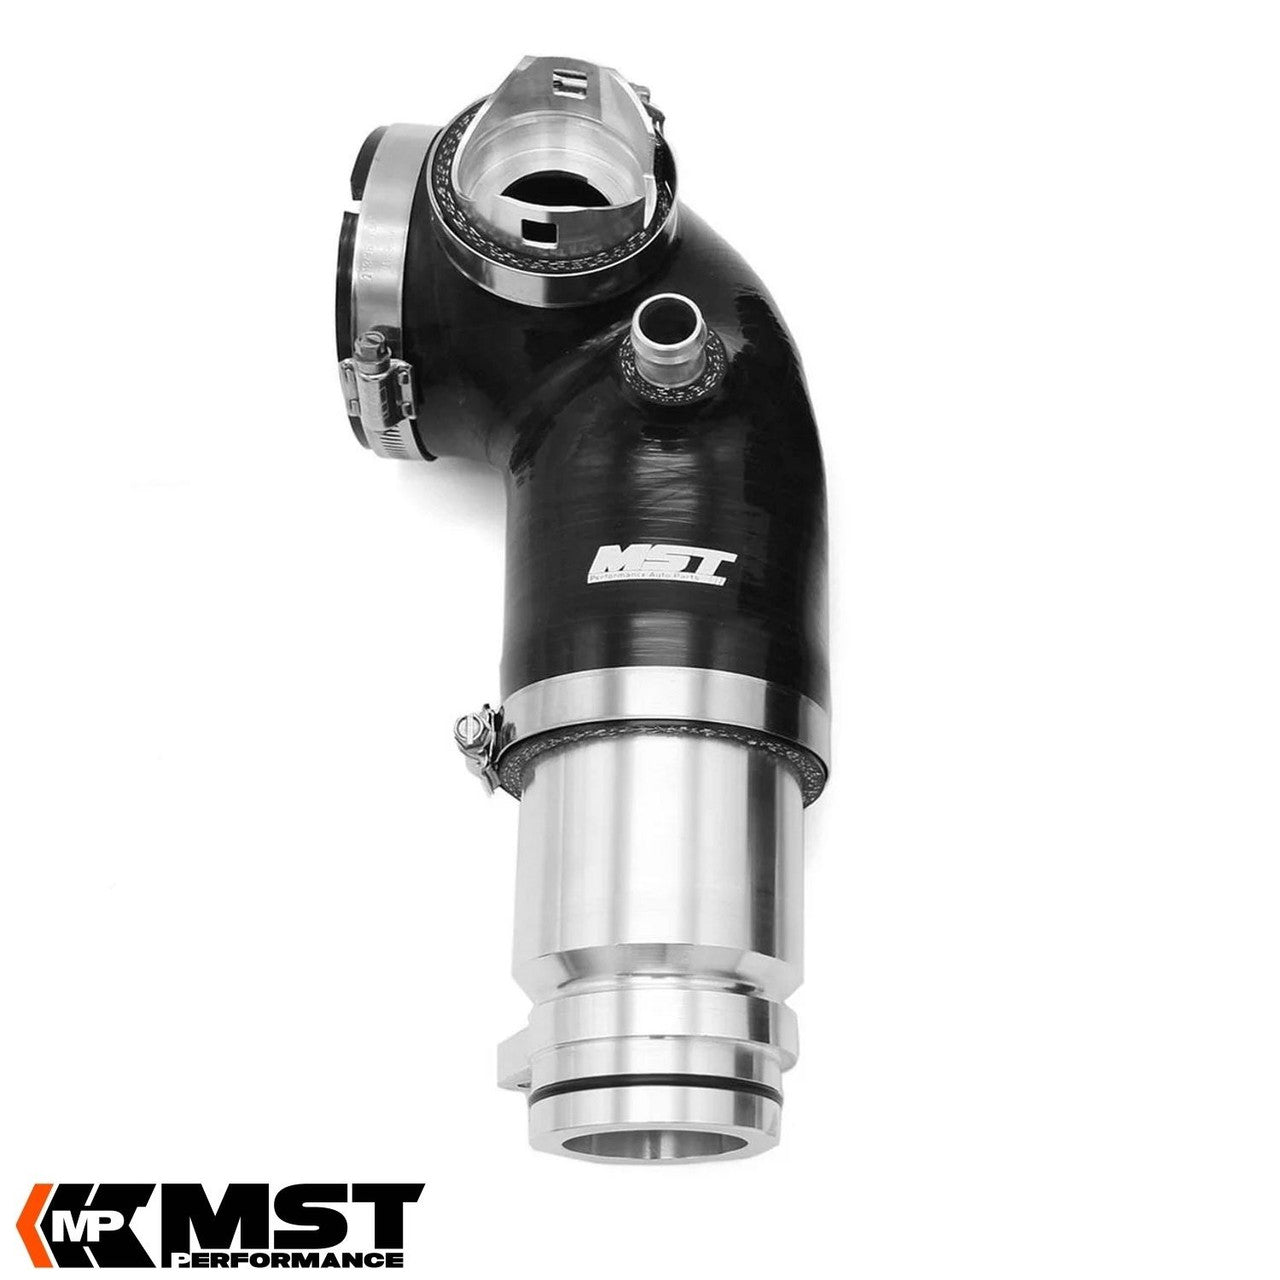 MST Performance Turbo Inlet Pipe for 2.0T N20 BMW-MST Induction Kits-carbonizeduk